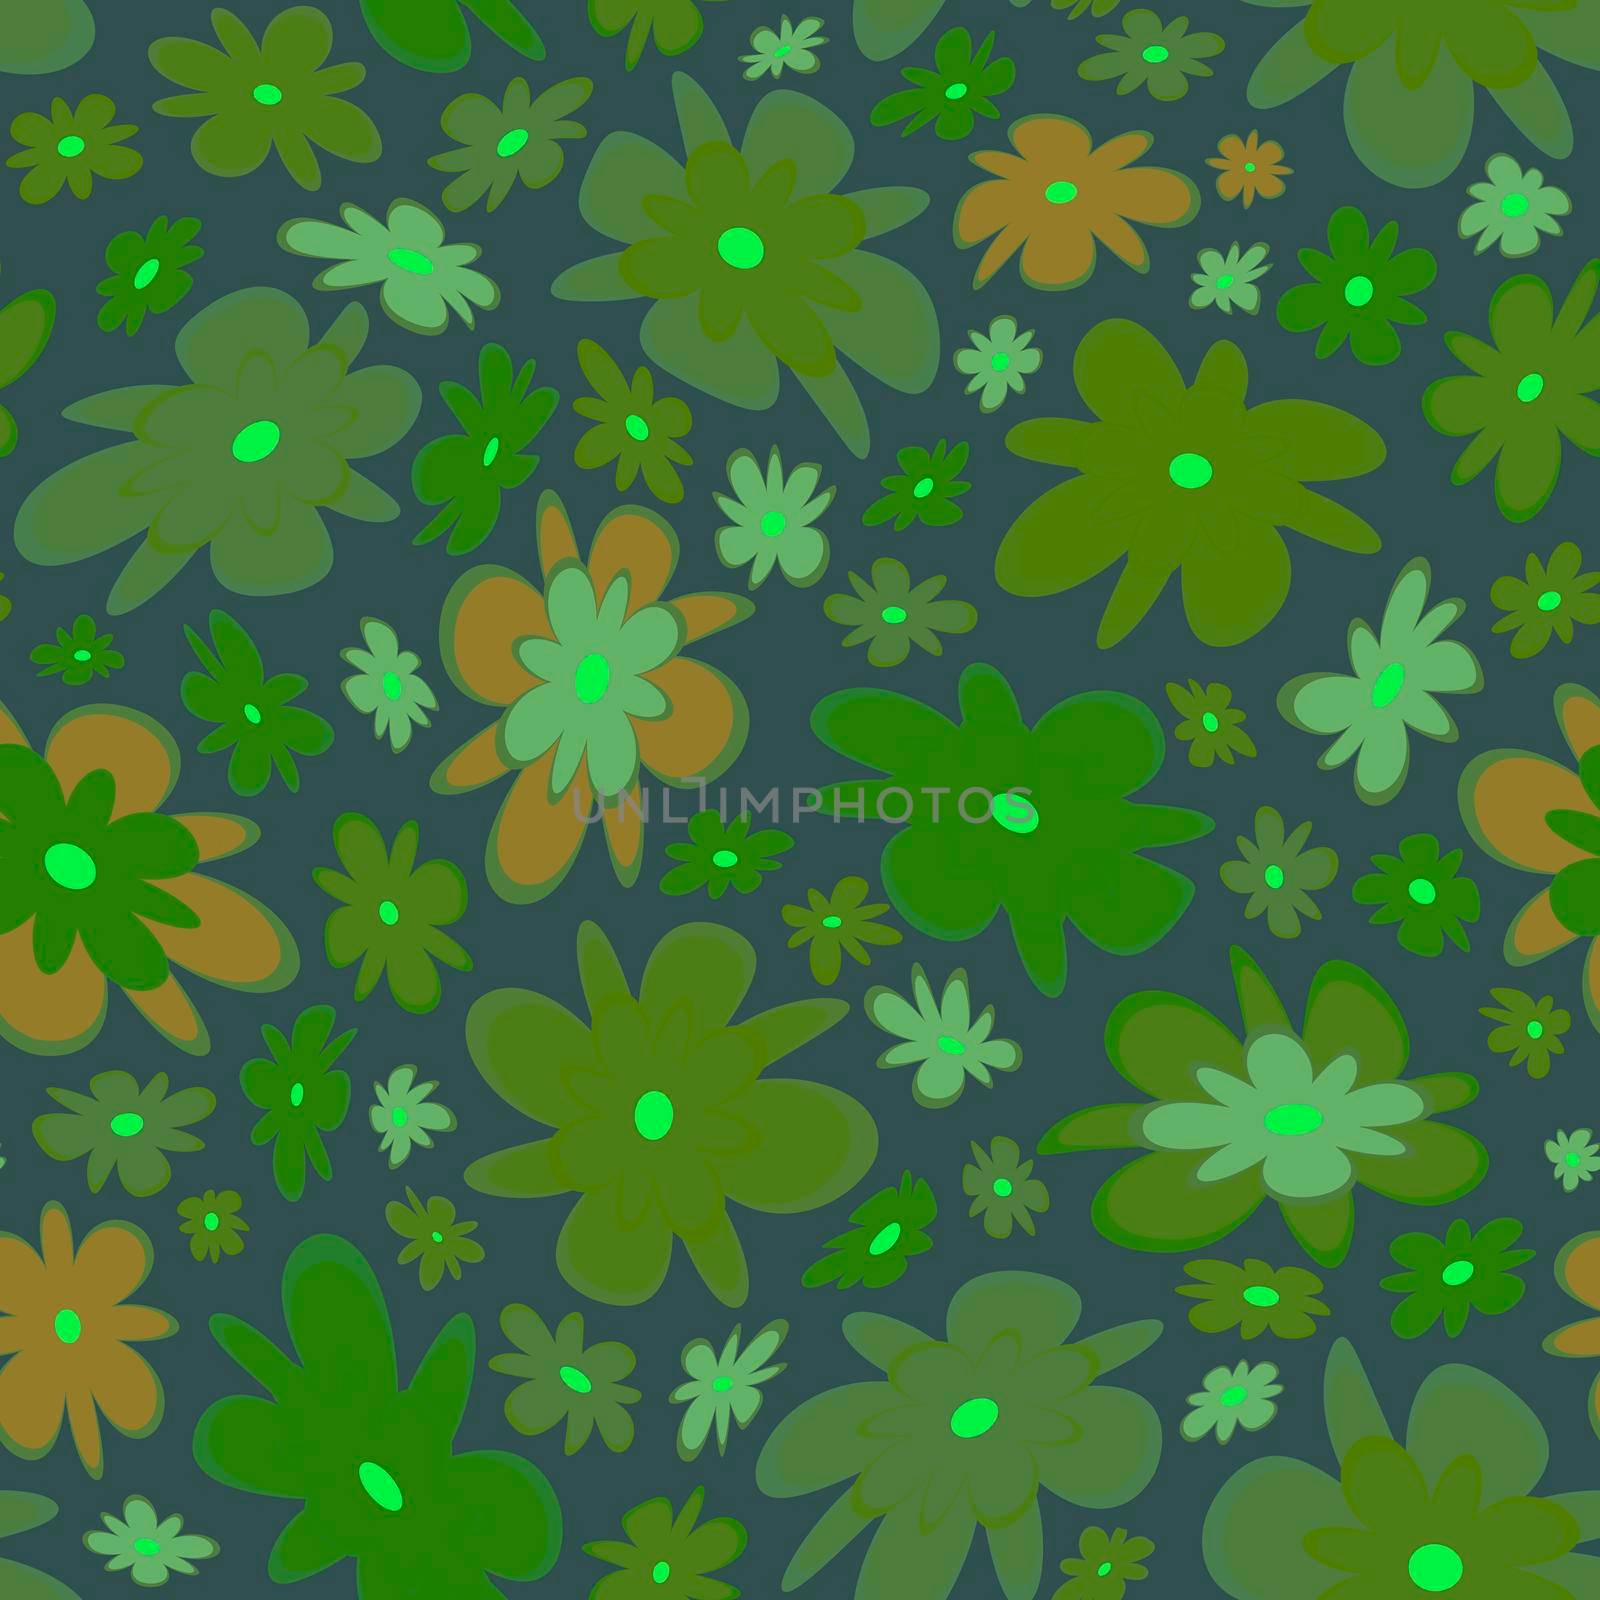 Trendy fabric pattern with miniature flowers.Summer print.Fashion design.Motifs scattered random.Elegant template for fashion prints.Green on gray.Good for fashion,textile,fabric,gift wrapping paper